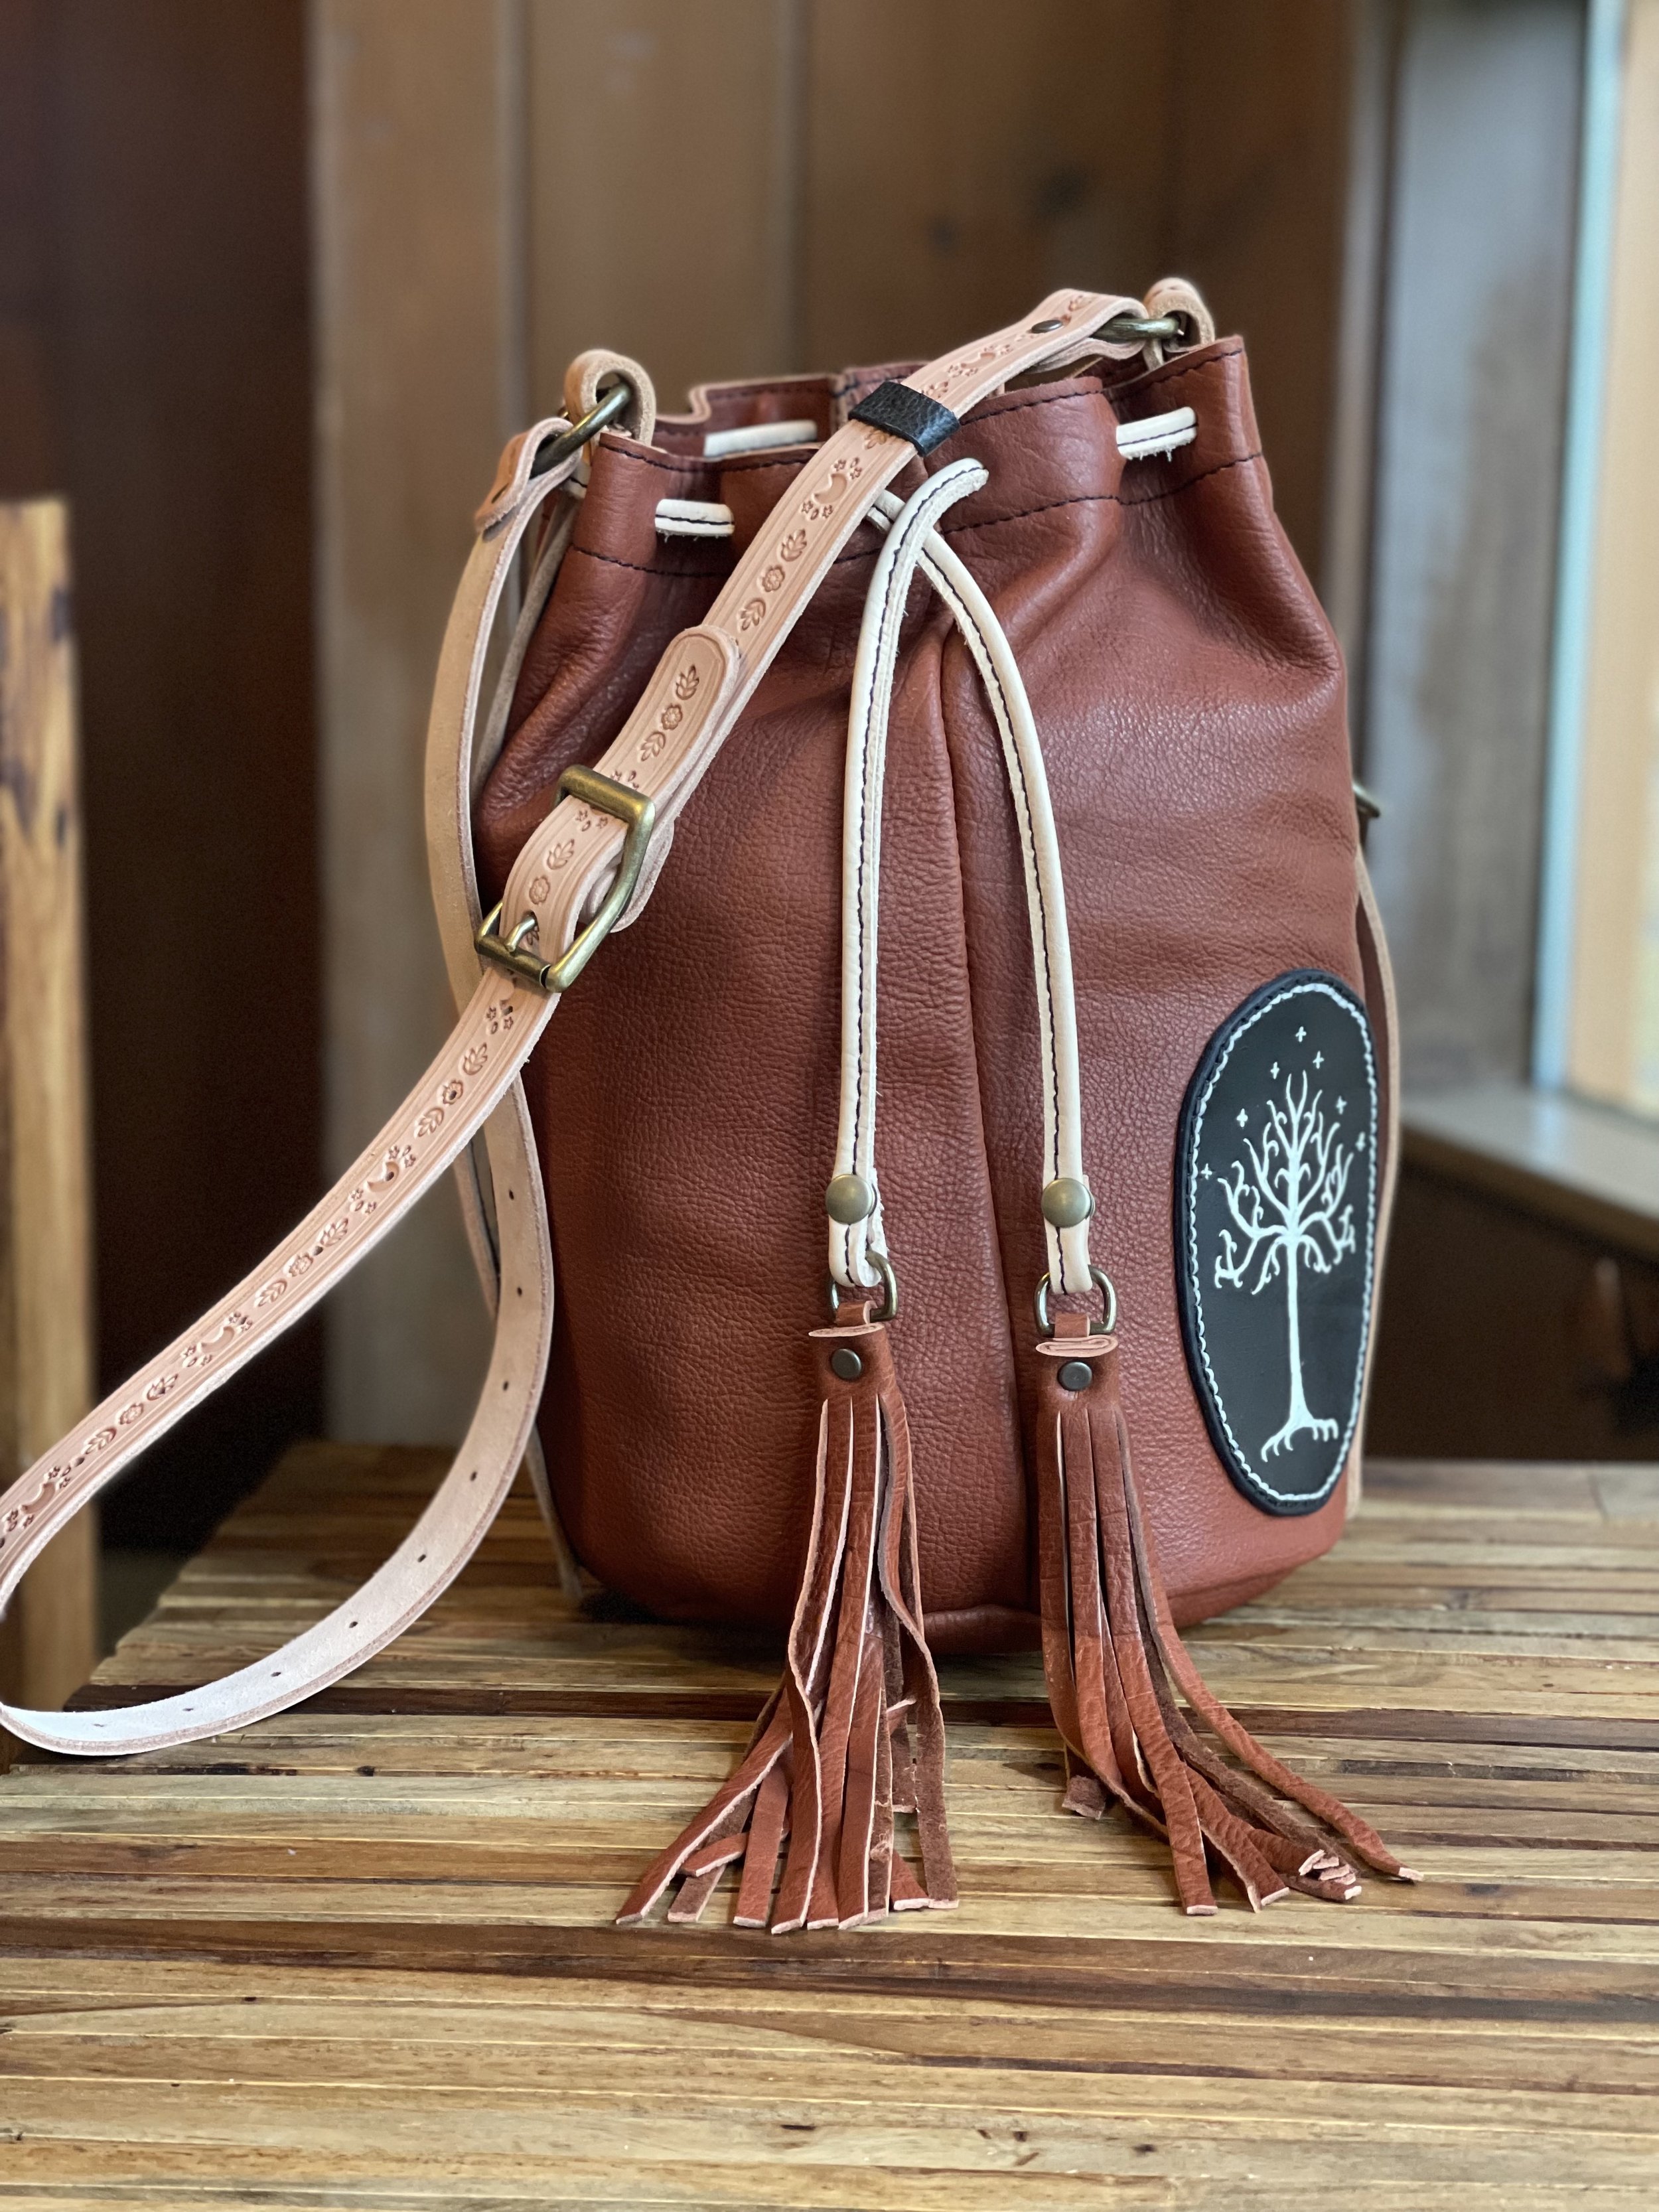 LILI BUCKET BAG IN TOBACCO BISON LEATHER, HAND STAMPED VEGETABLE TANNED LEATHER STRAP, REMOVABLE FRINGE PULLS, AND A CUSTOM REQUESTED SEWN PATCH FROM CUSTOMER'S PERSONAL COLLECTION.